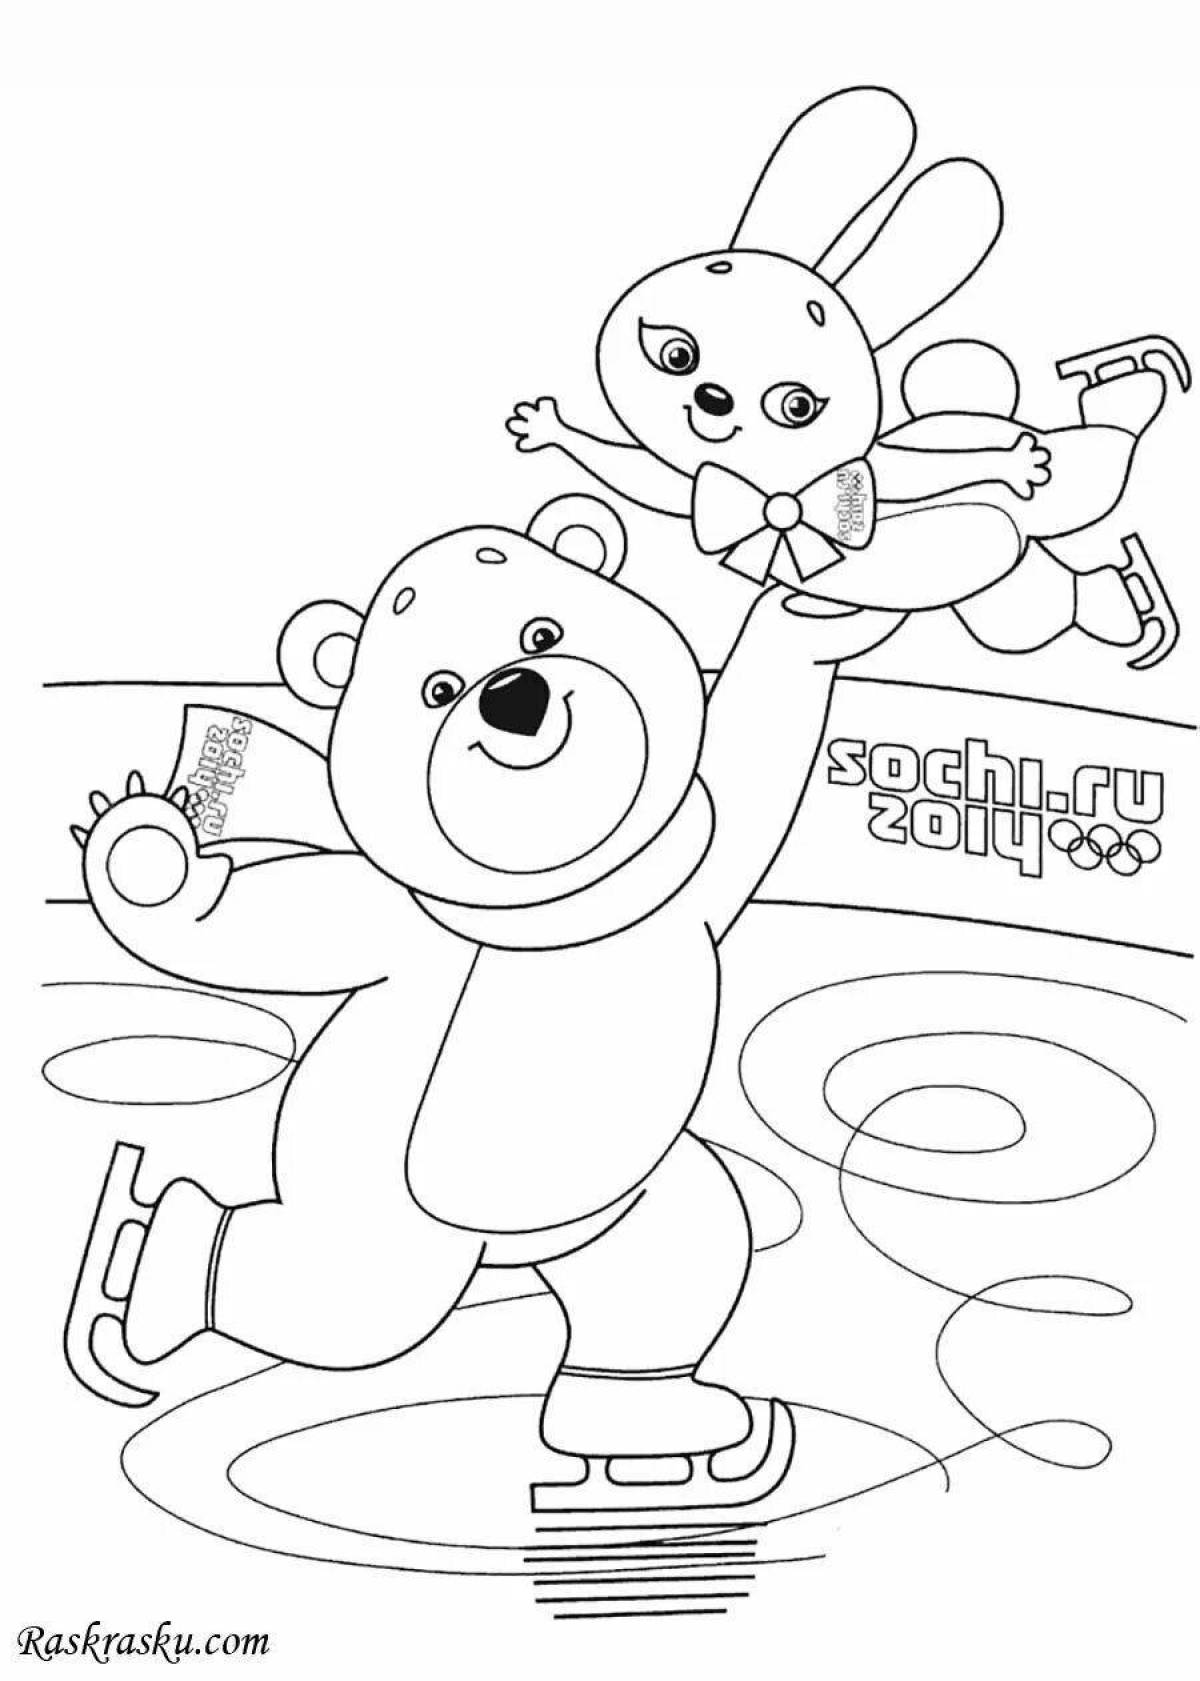 Animated coloring book for children's olympic sports